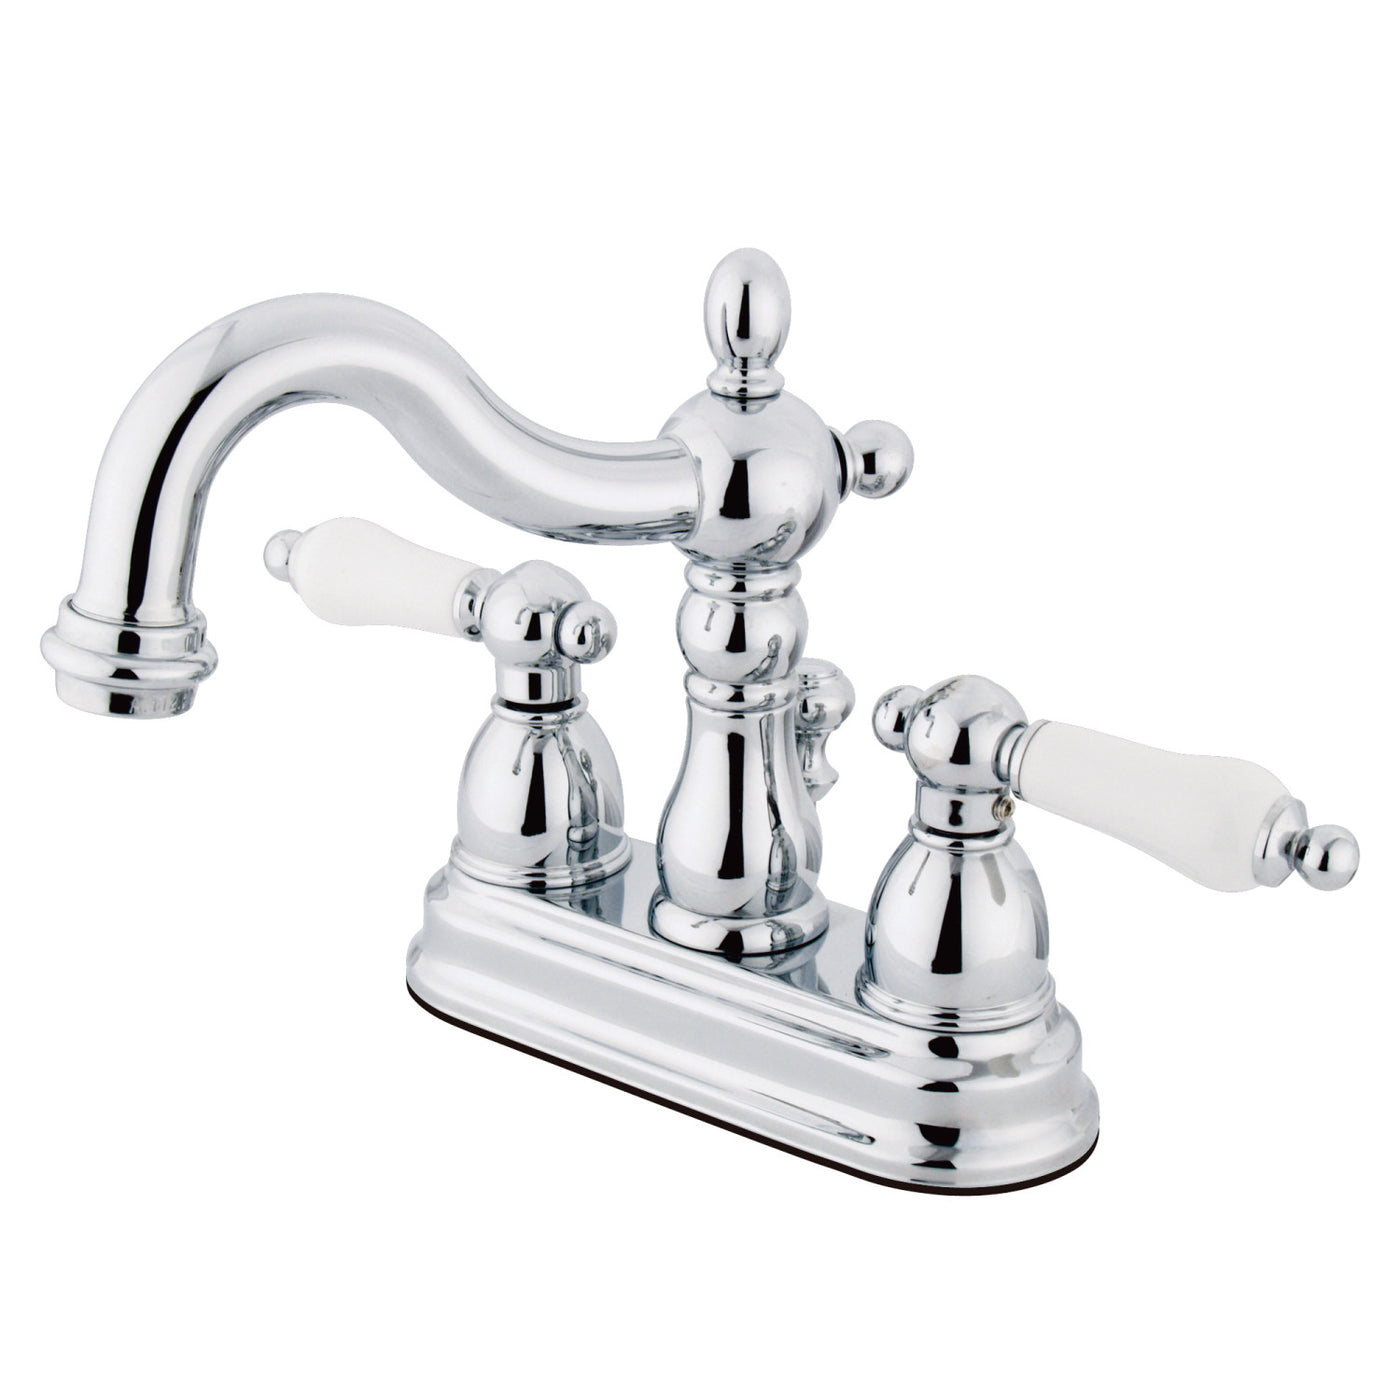 Elements of Design EB1601PL 4-Inch Centerset Bathroom Faucet with Plastic Pop-Up, Polished Chrome